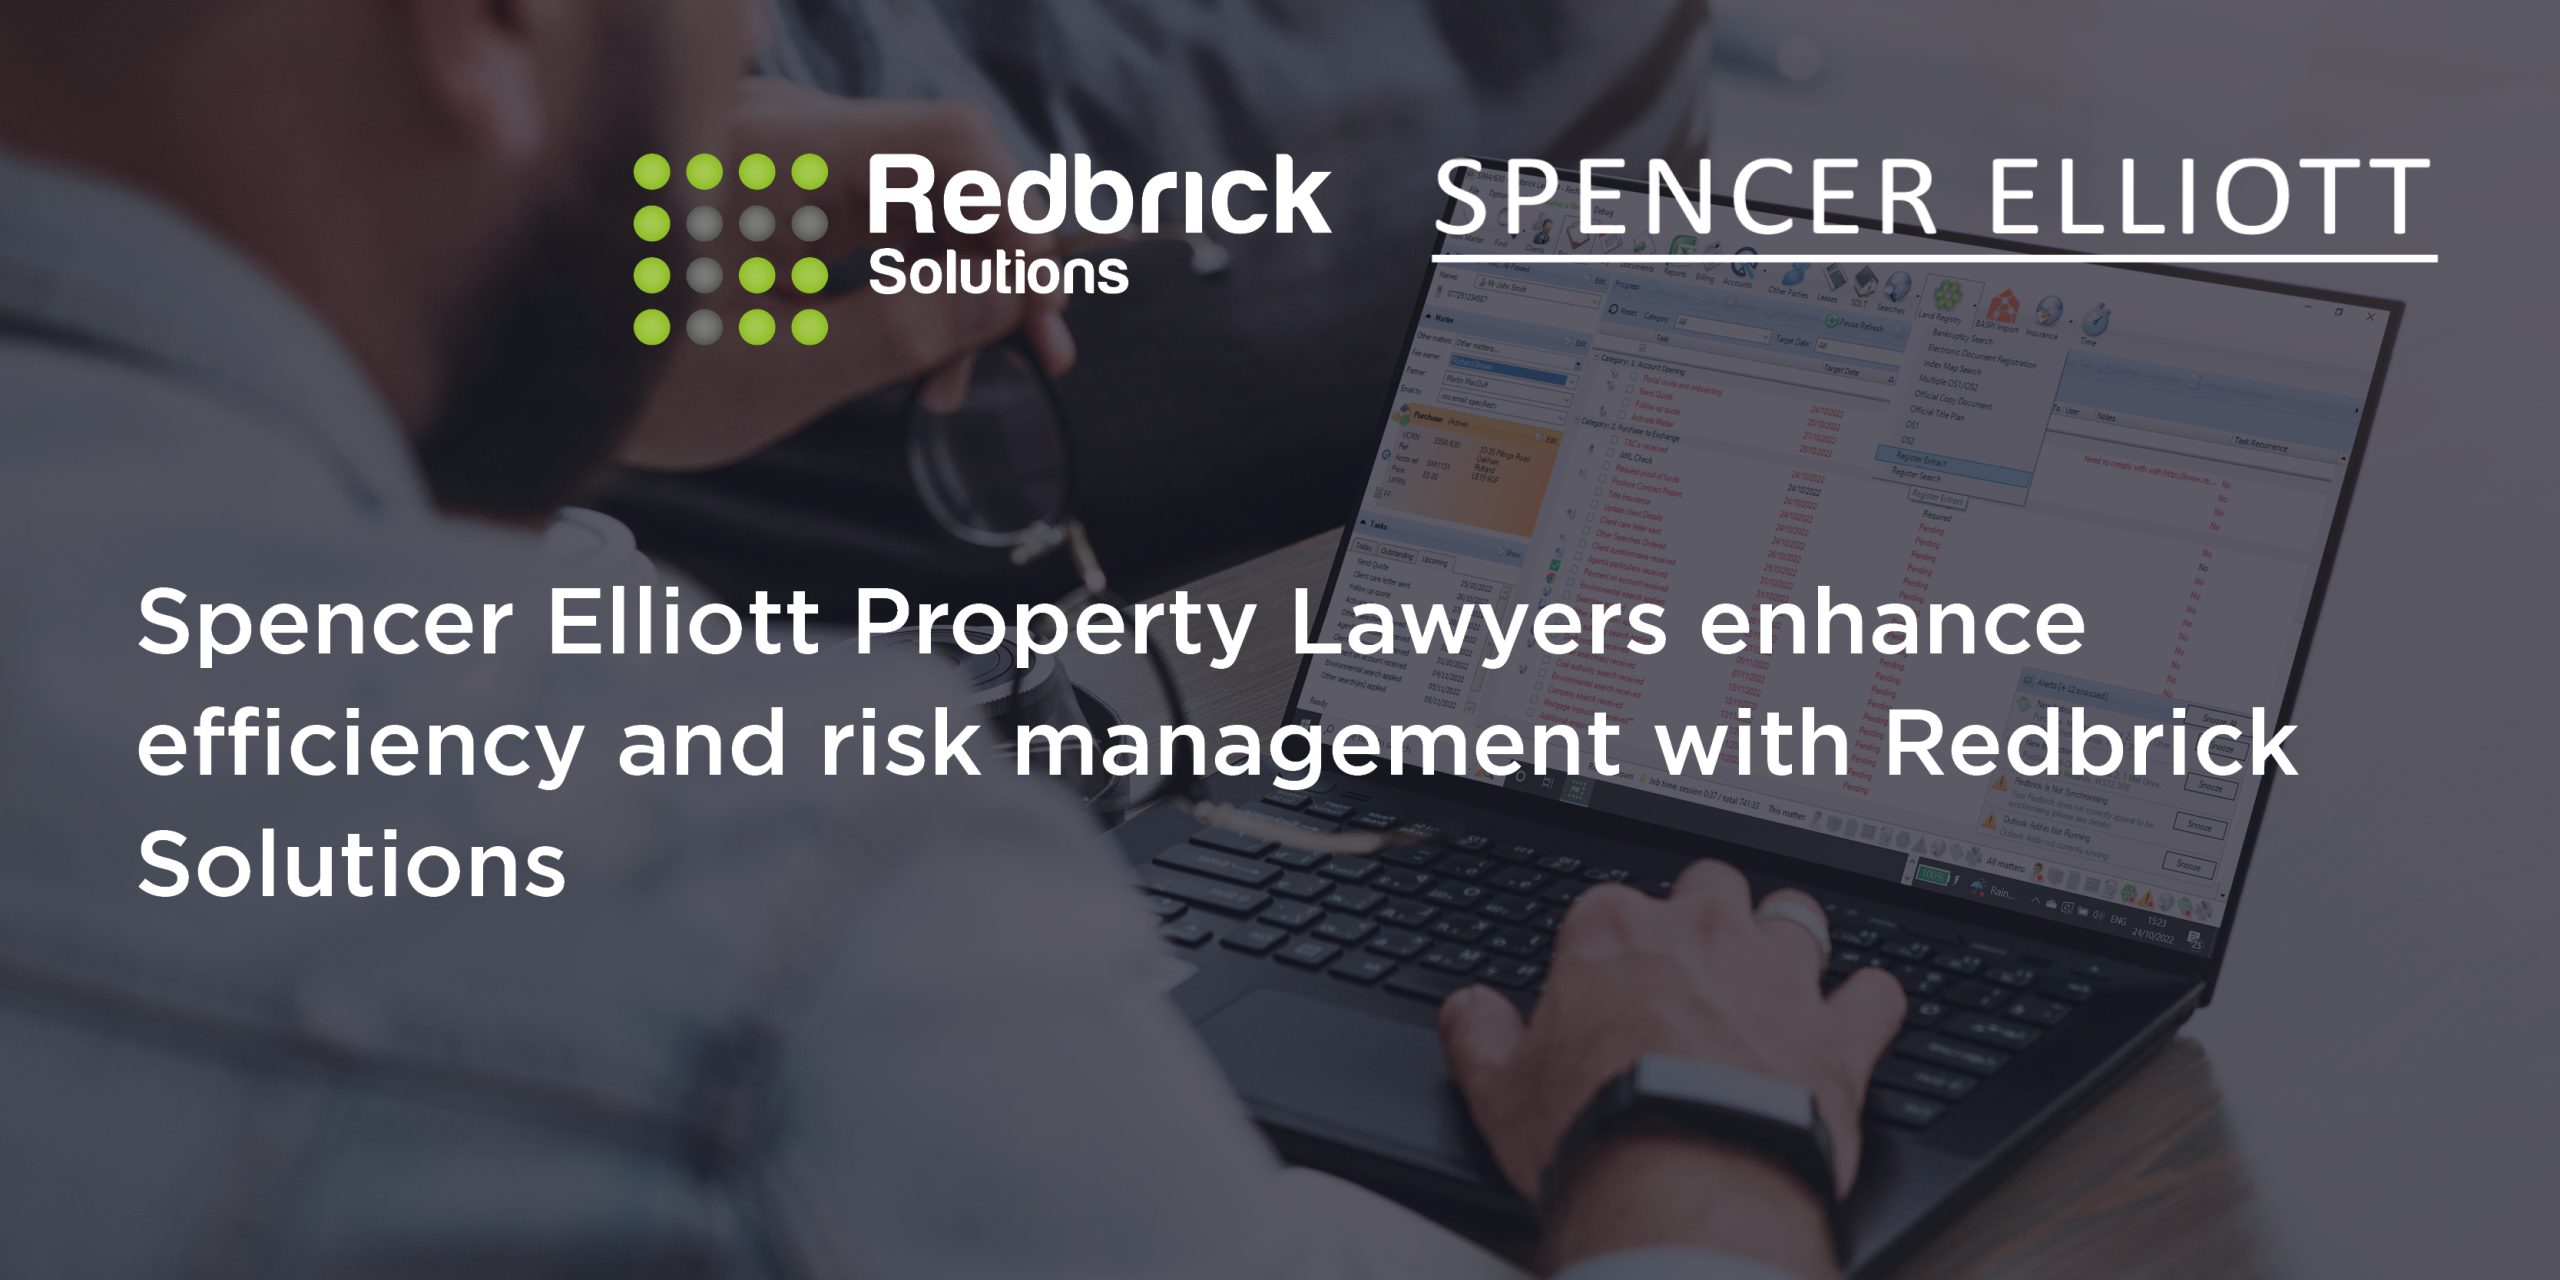 Spencer Elliott Property Lawyers enhance efficiency and risk management with Redbrick Solutions